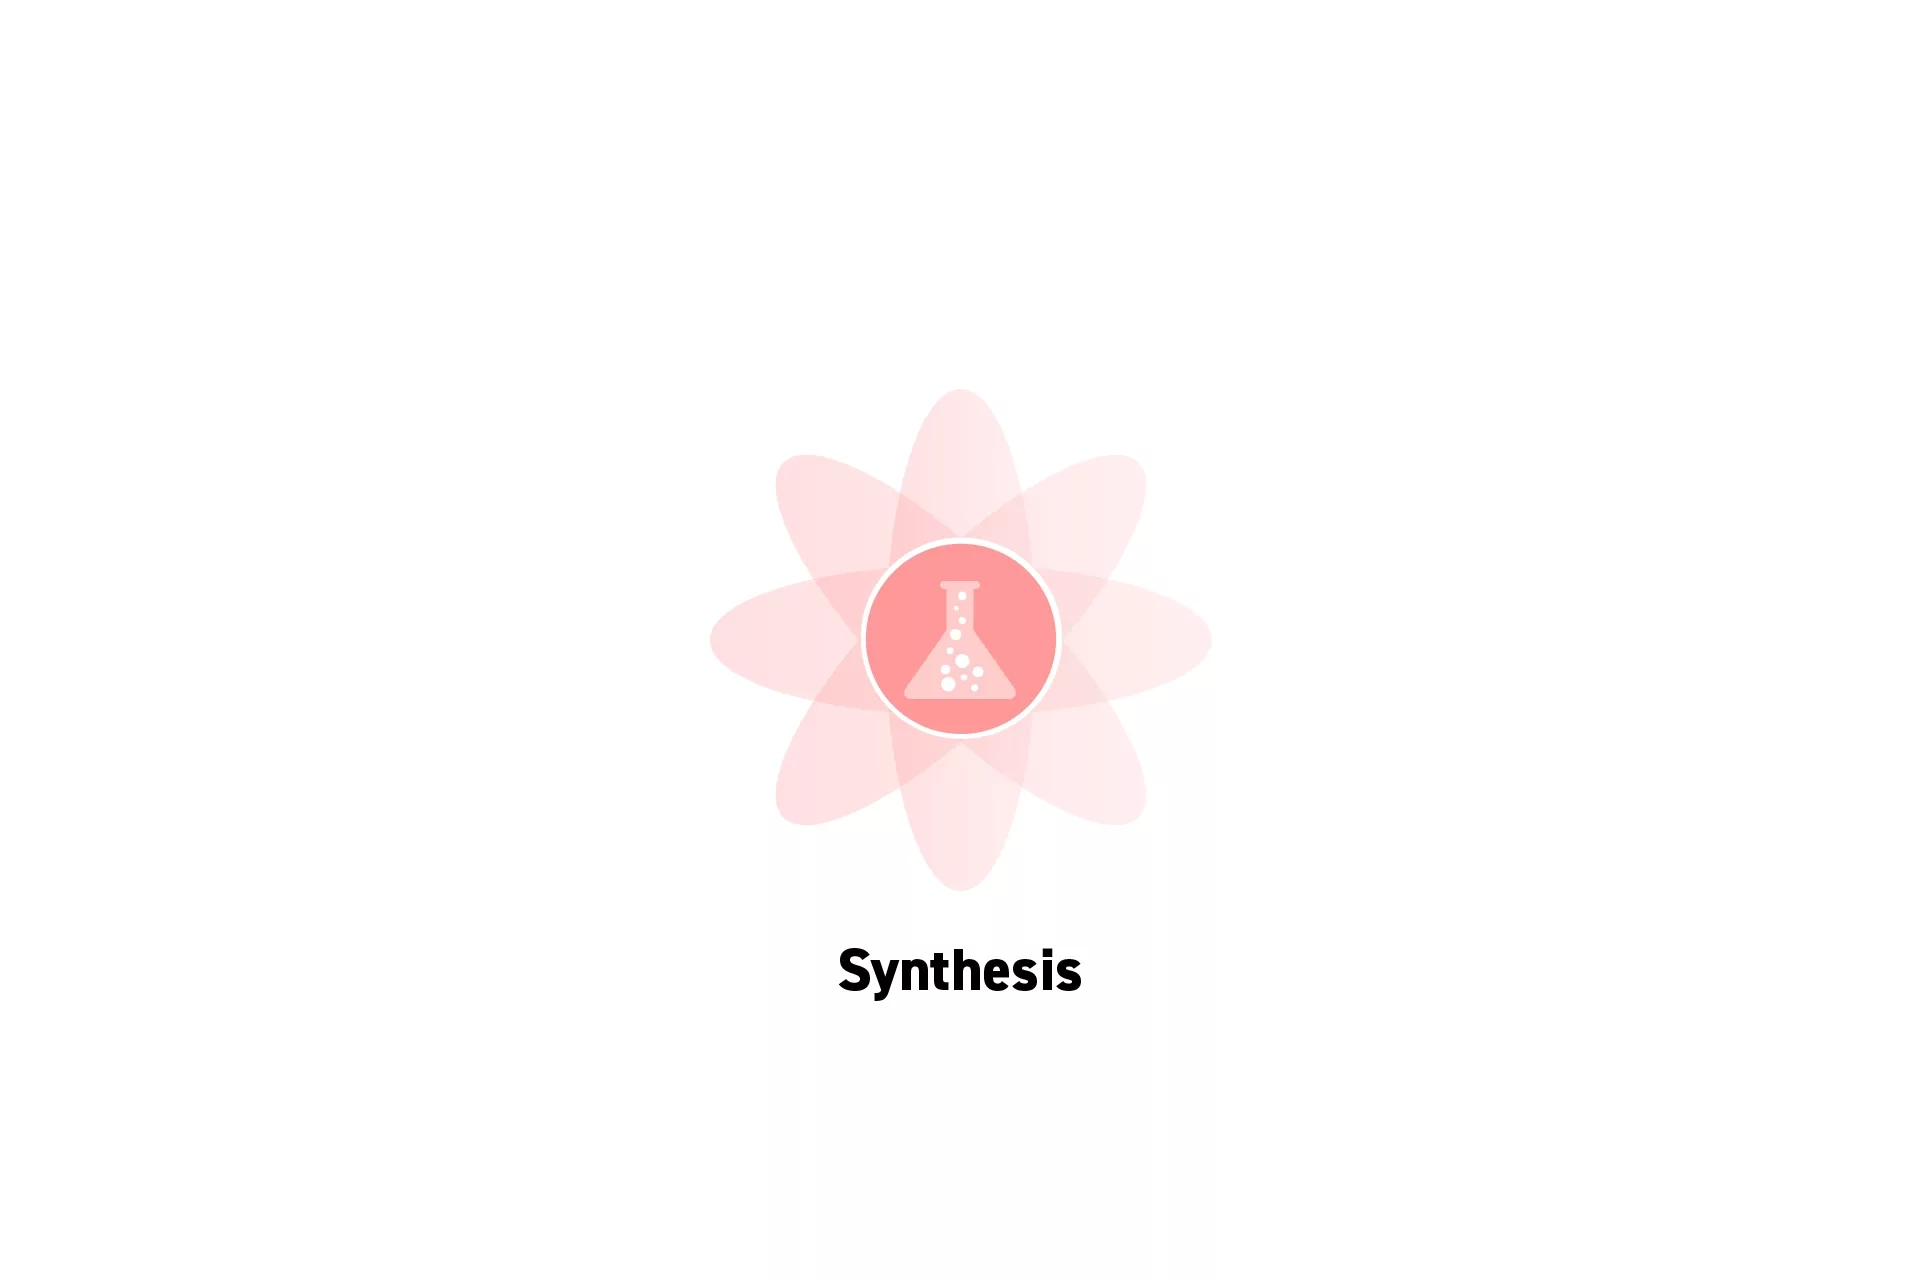 A flower that represents Strategy with the text "Synthesis" beneath it.